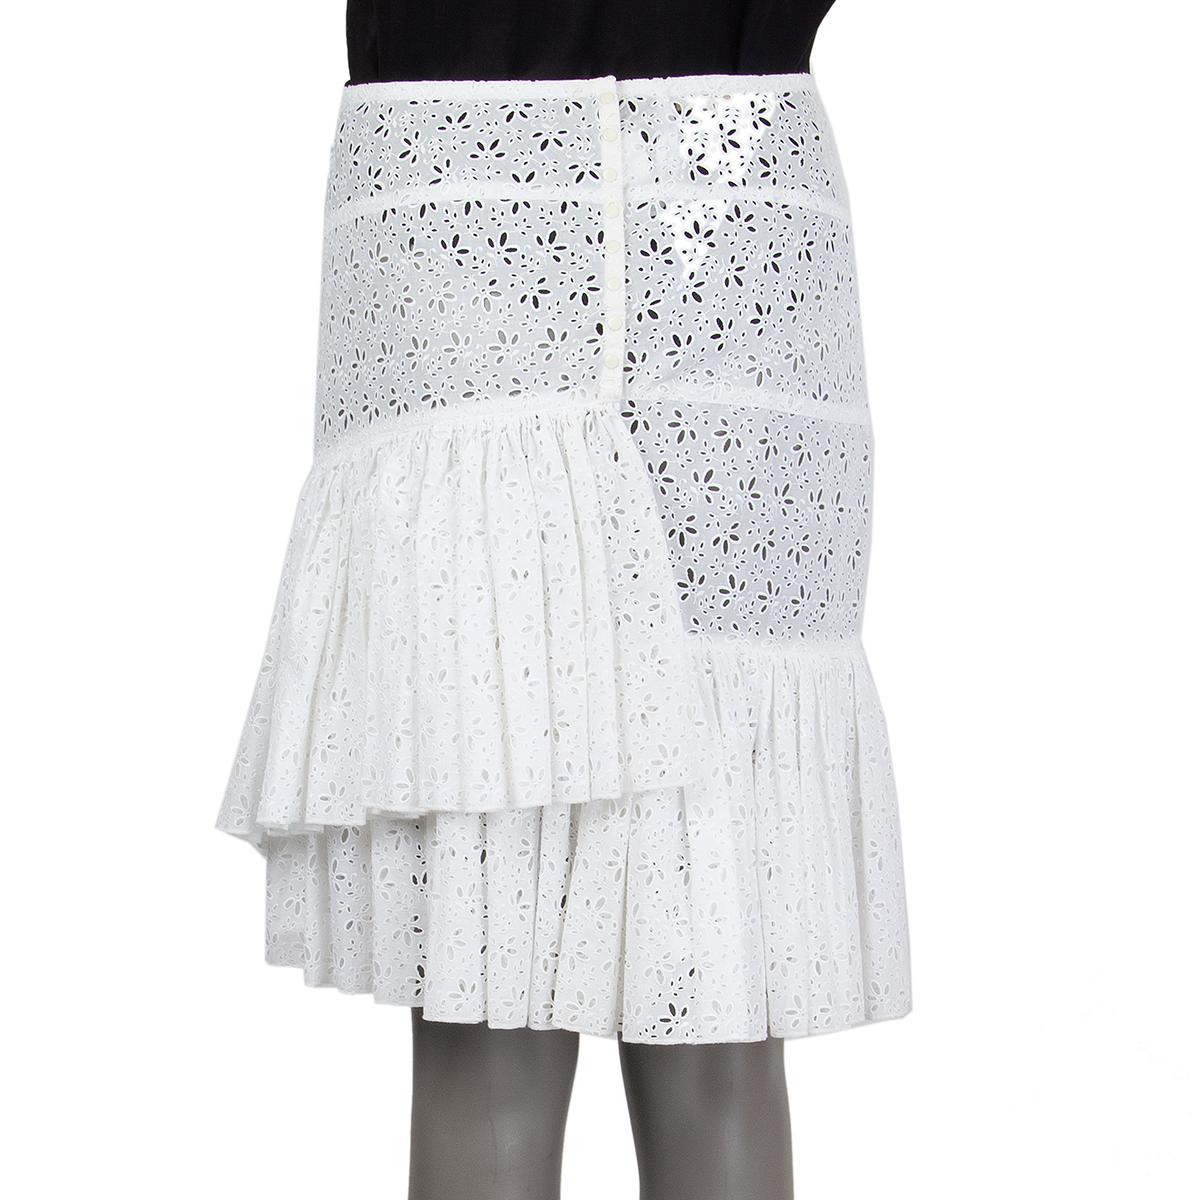 Women's ALAIA white cotton BRODERIE ANGLAISE EMBROIDERED RUCHEDSkirt 40 M